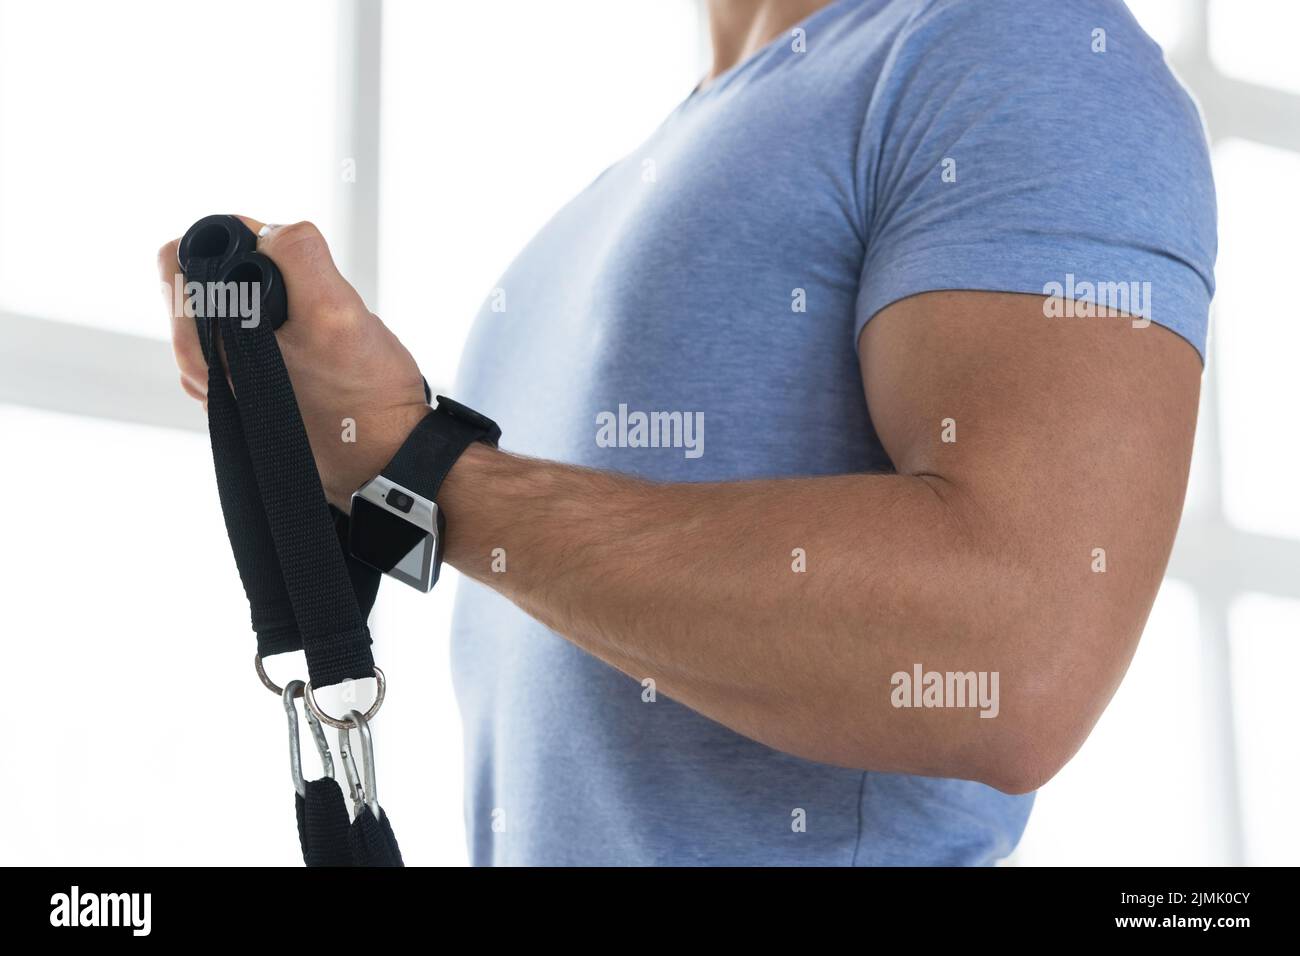 Young man during workout with a resistance bands in the gym Stock Photo